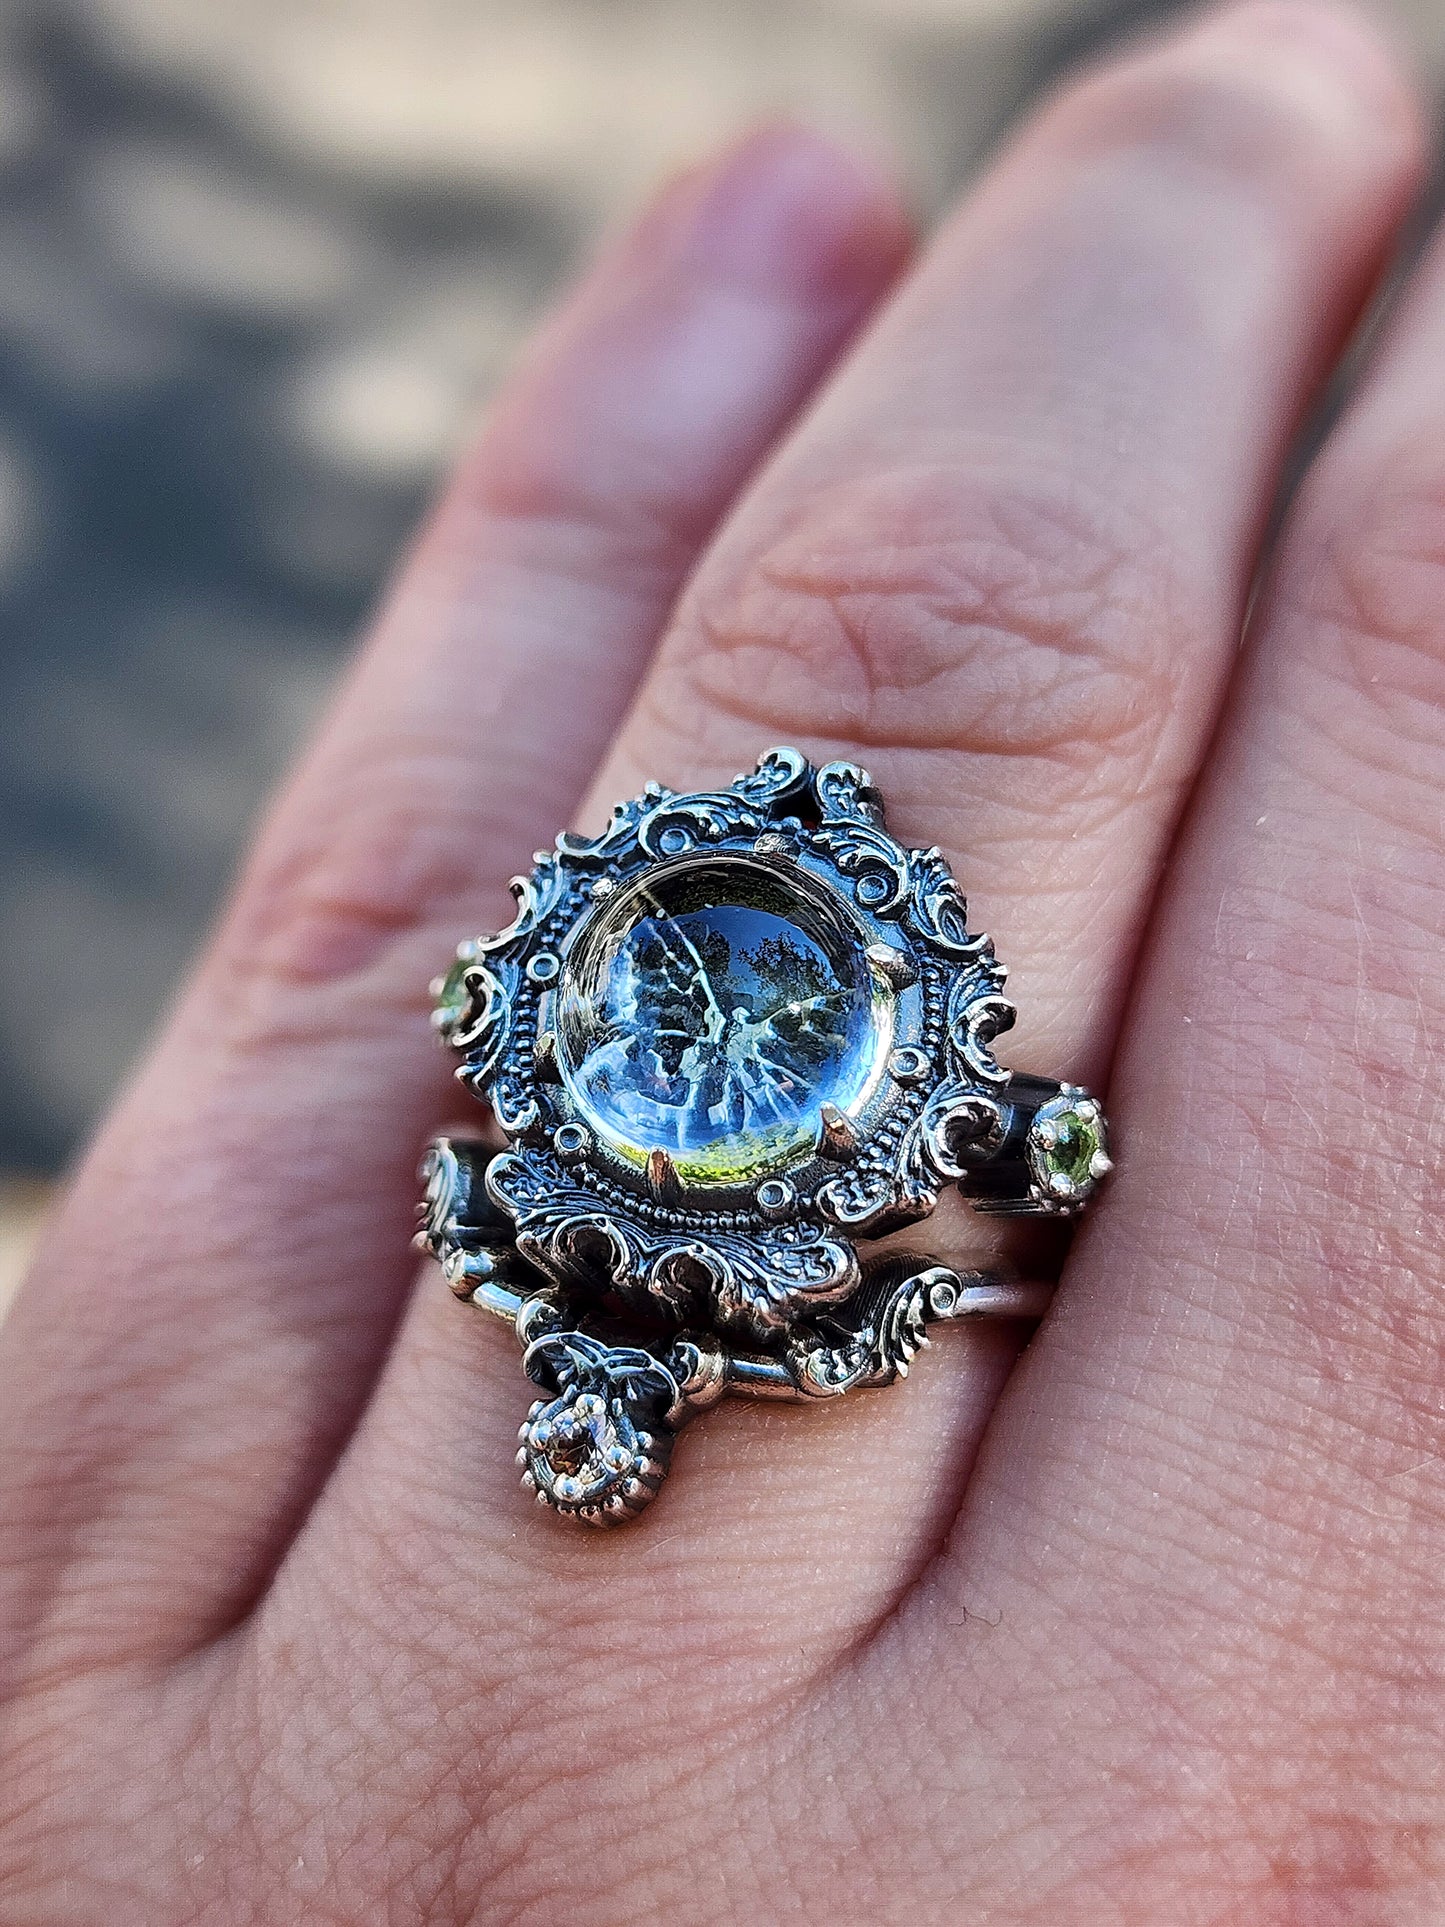 Butterfly Shadow Box Ring with Peridot and Yellow Sapphire Baroque Scroll Side Band - Sterling Silver - Ready to Ship Size 6 - 8